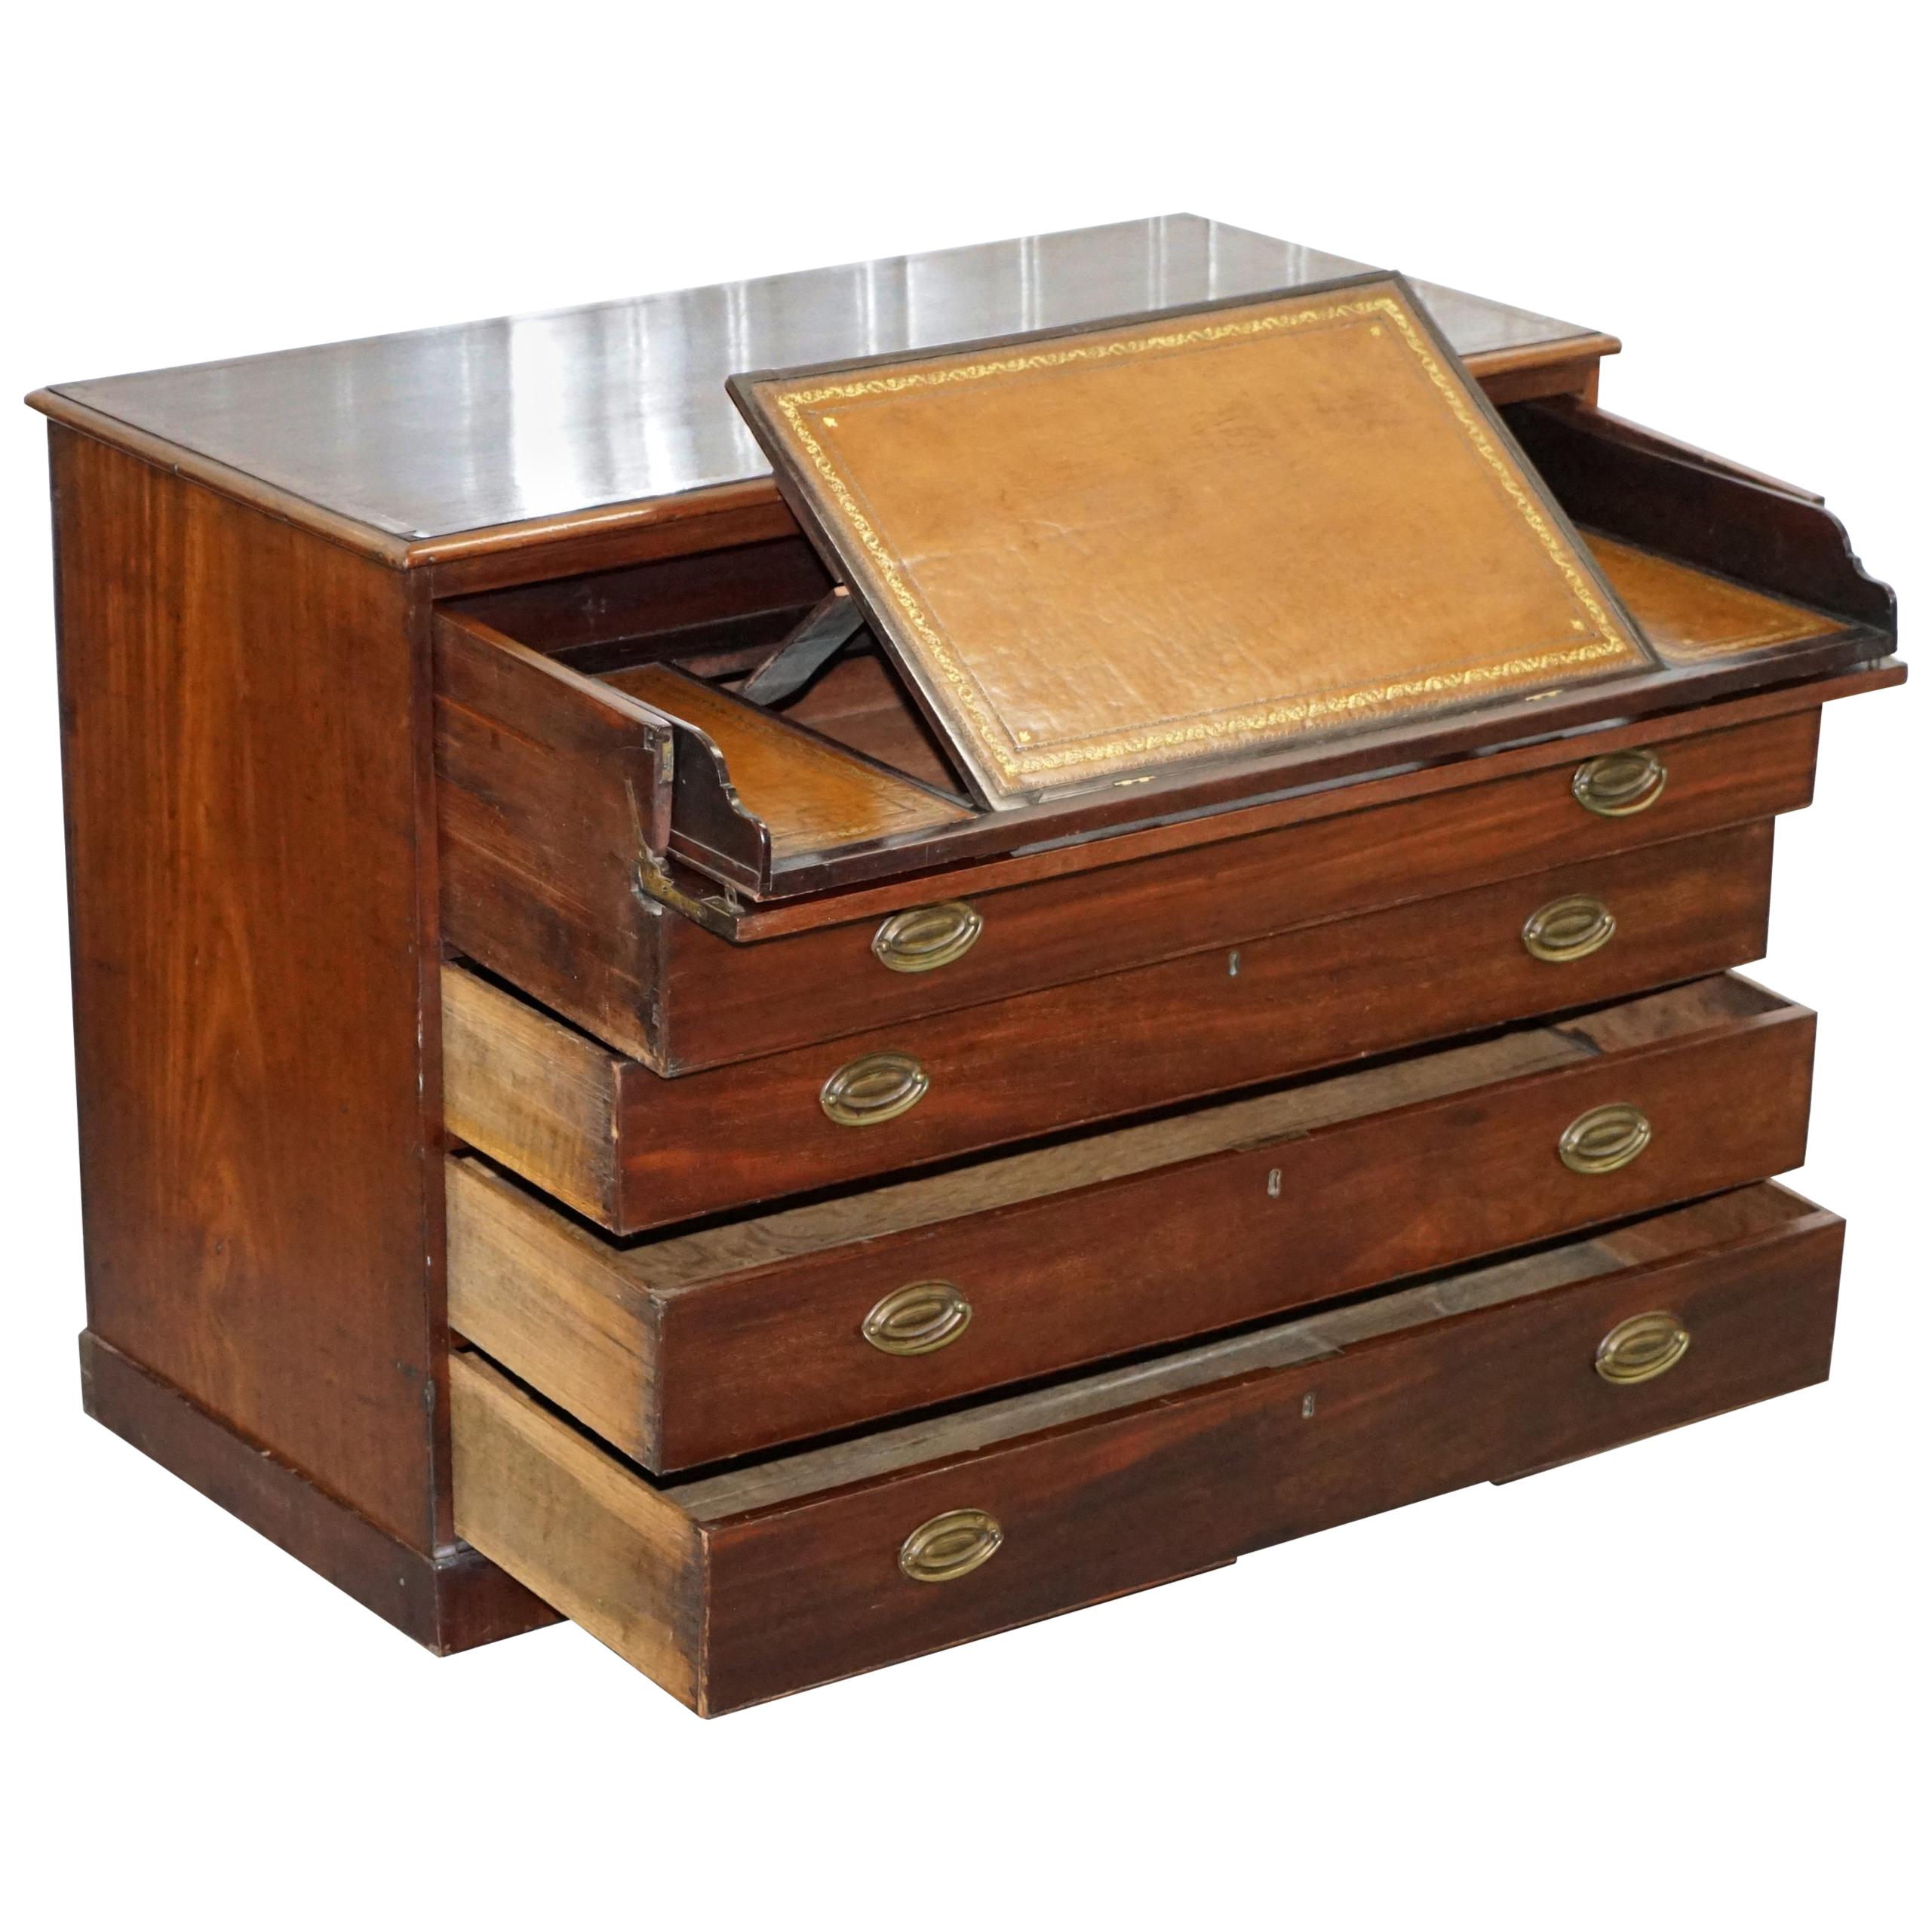 Robert Gillows II 1790 Writing Library Hardwood  Chest of Drawers Leather Slope For Sale